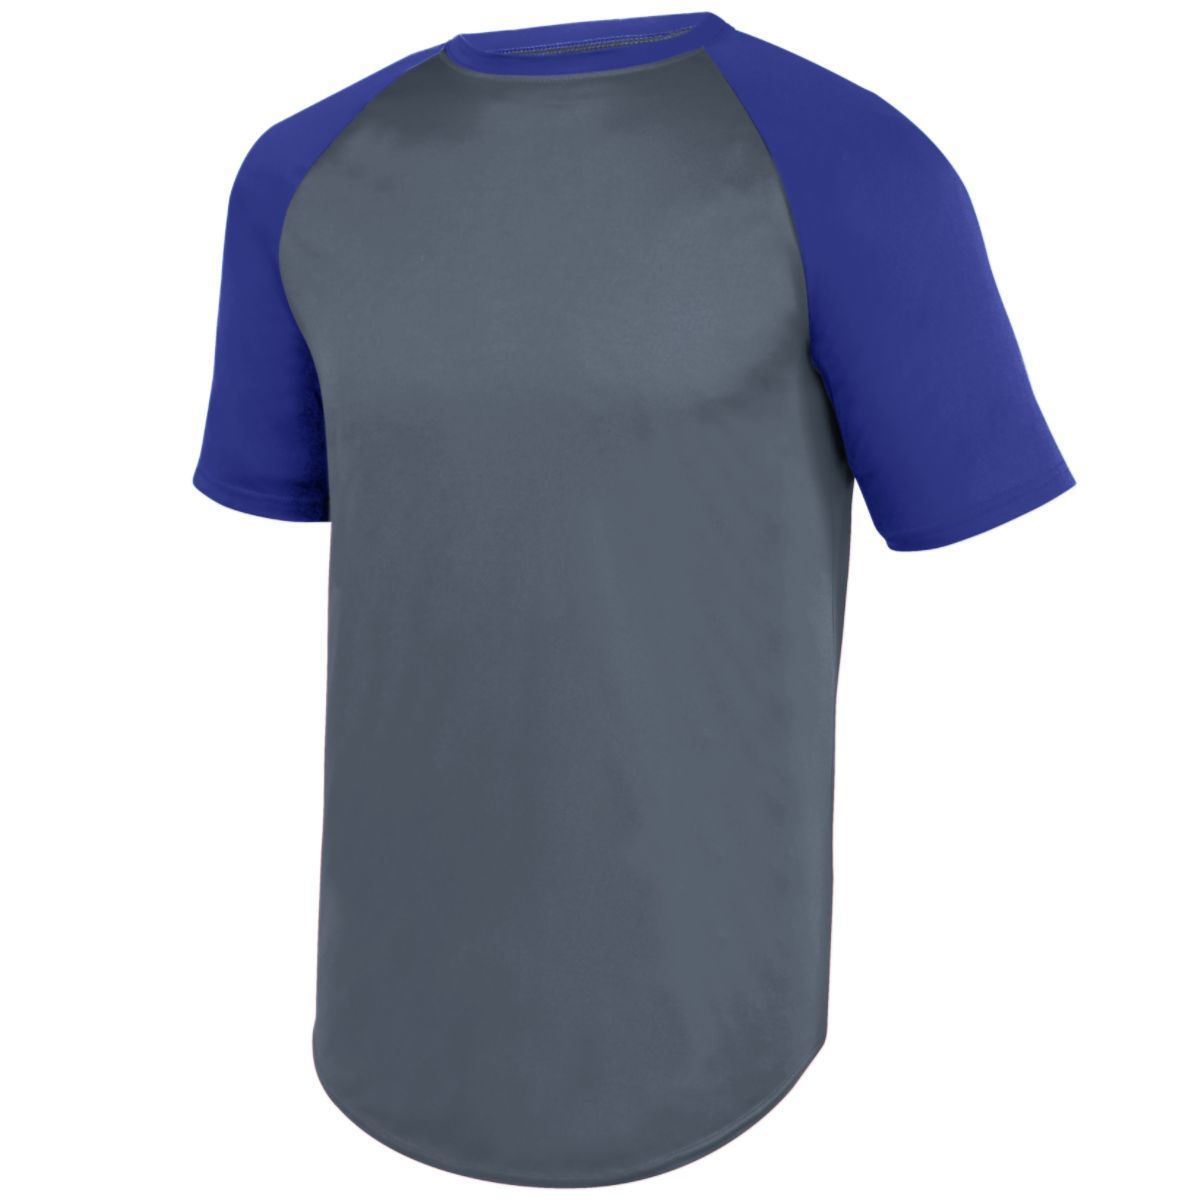 Augusta Sportswear Youth Wicking Short Sleeve Baseball Jersey in Graphite/Purple  -Part of the Youth, Youth-Jersey, Augusta-Products, Baseball, Shirts, All-Sports, All-Sports-1 product lines at KanaleyCreations.com